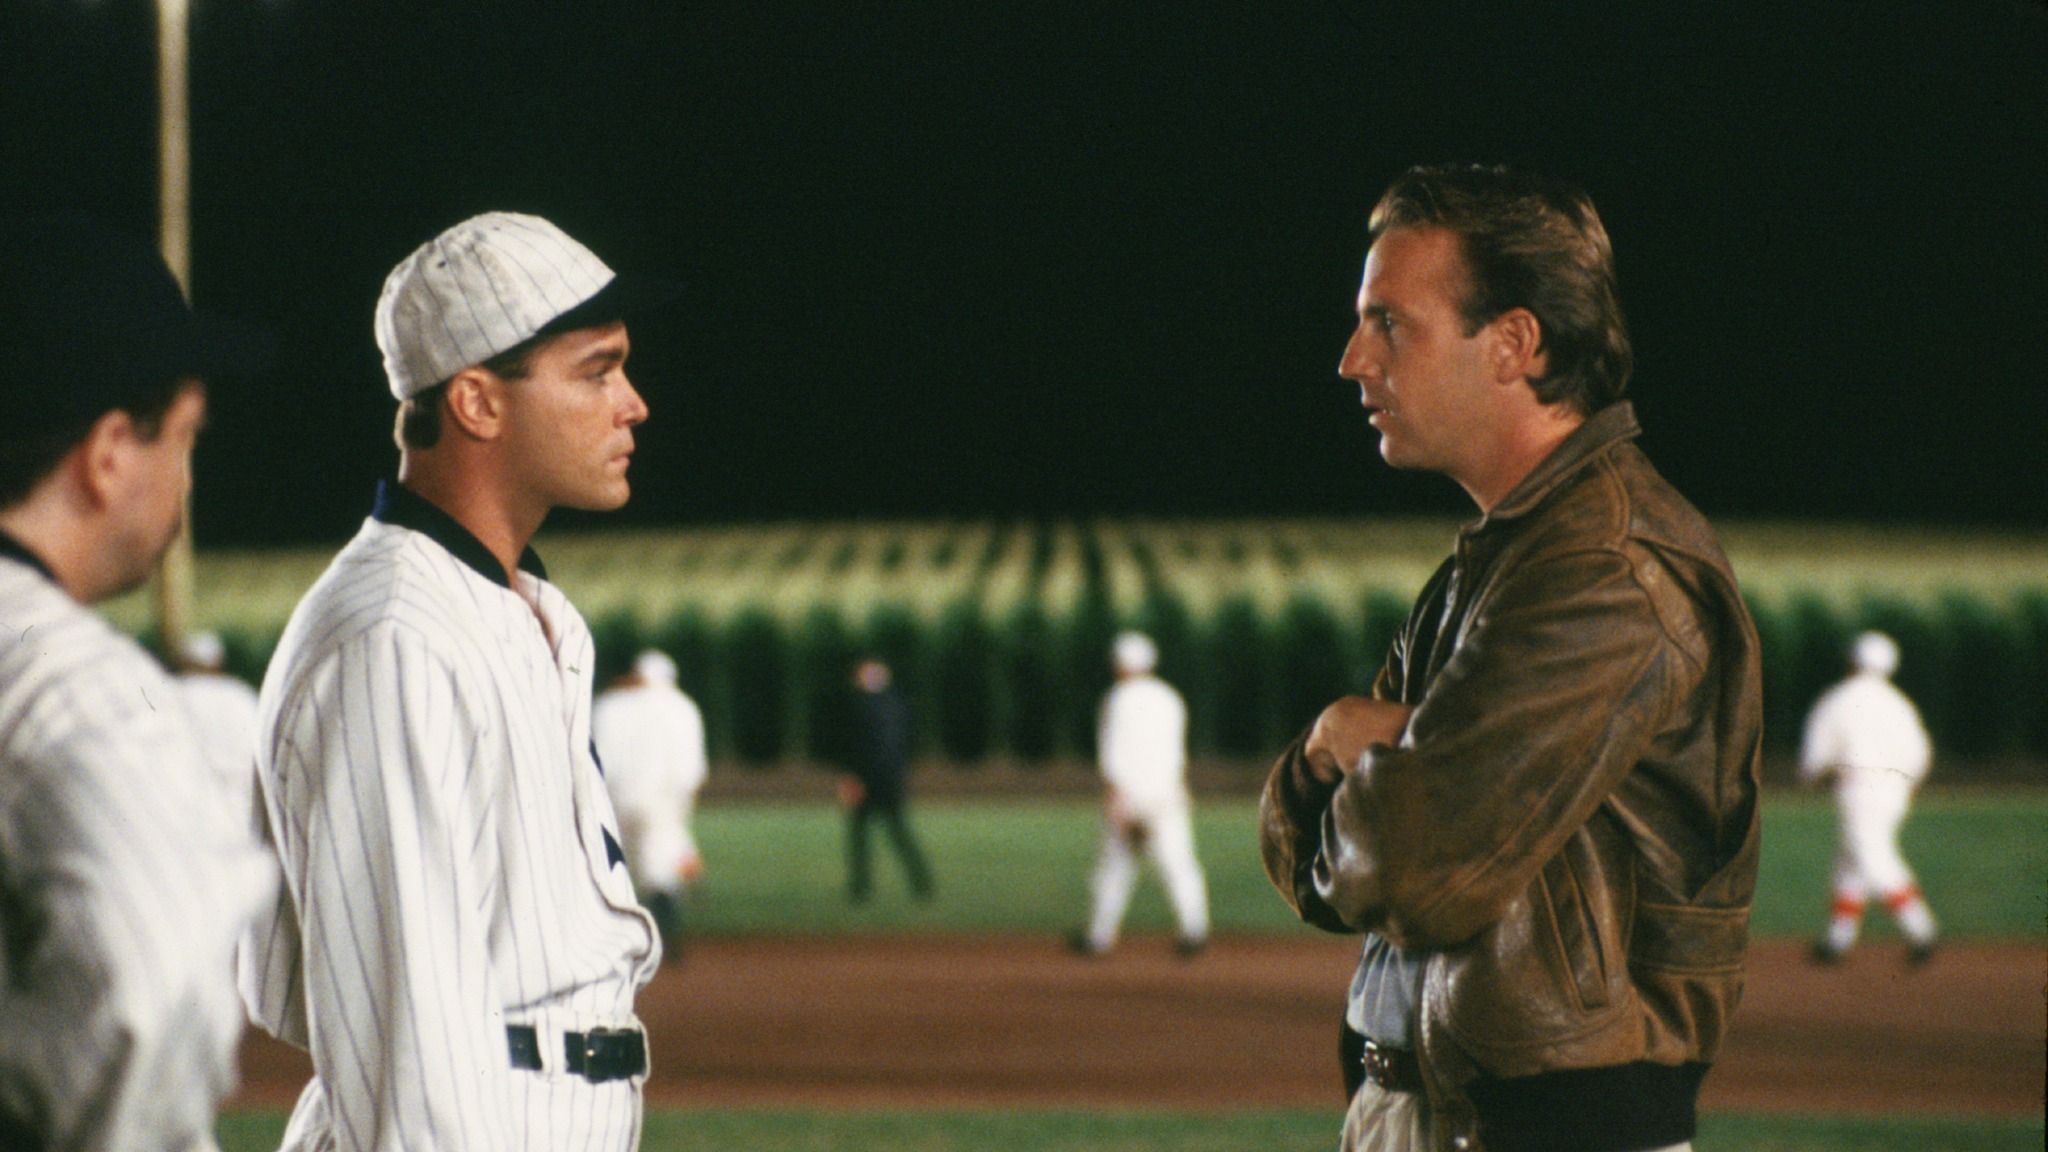 Field of Dreams 2022: How to Watch the Film-Inspired MLB Game Online